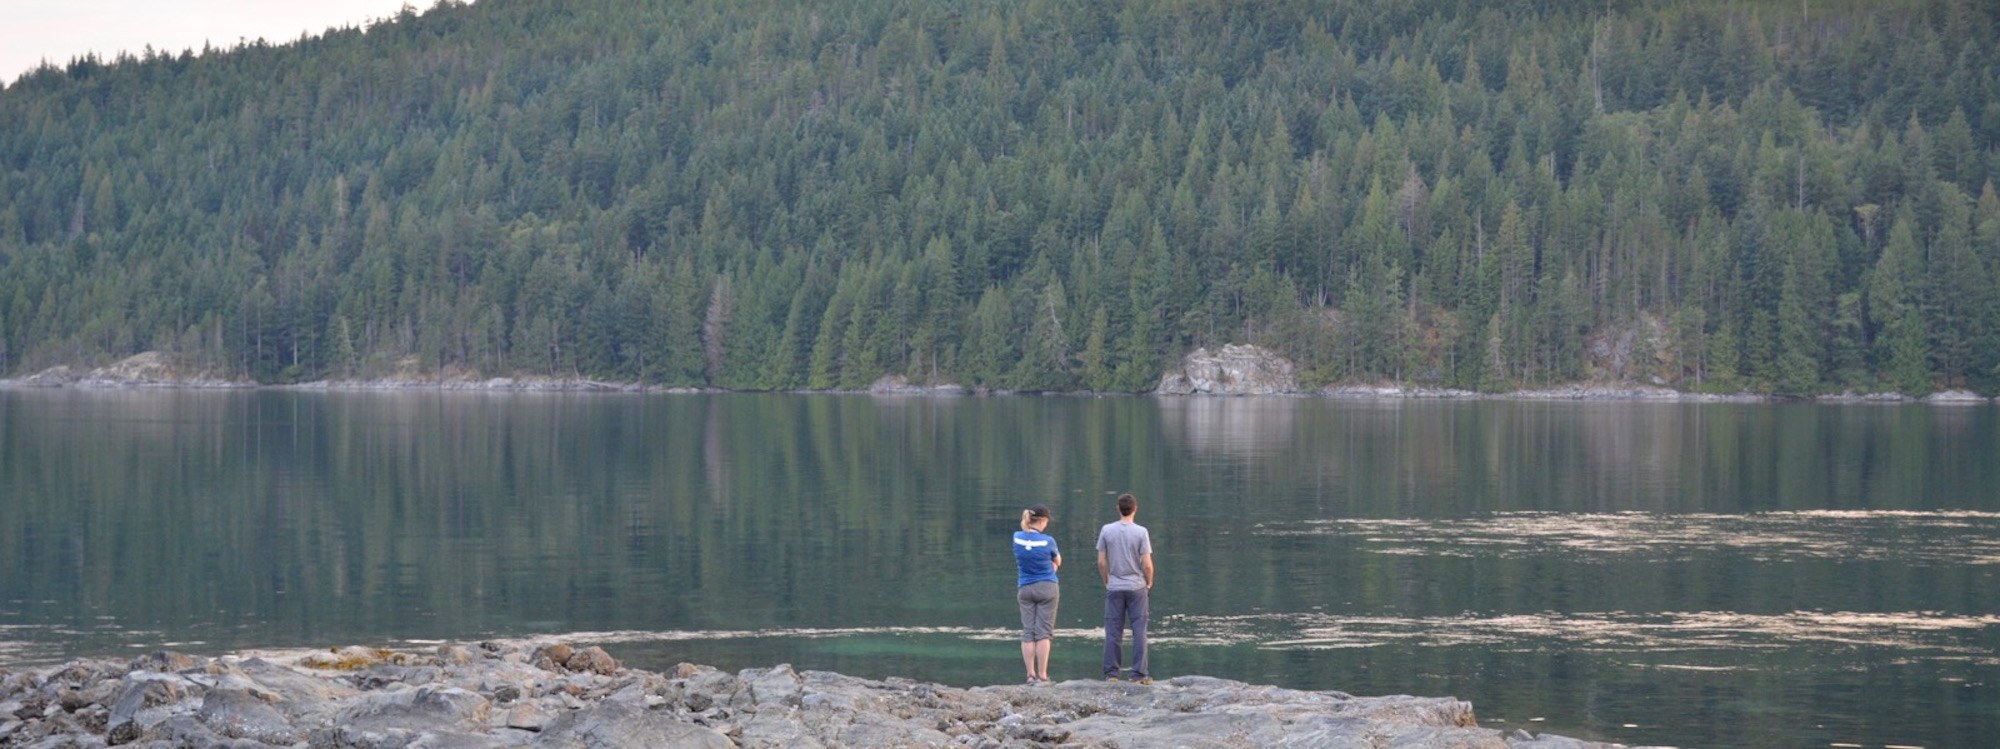 two people standing on rocks near the water